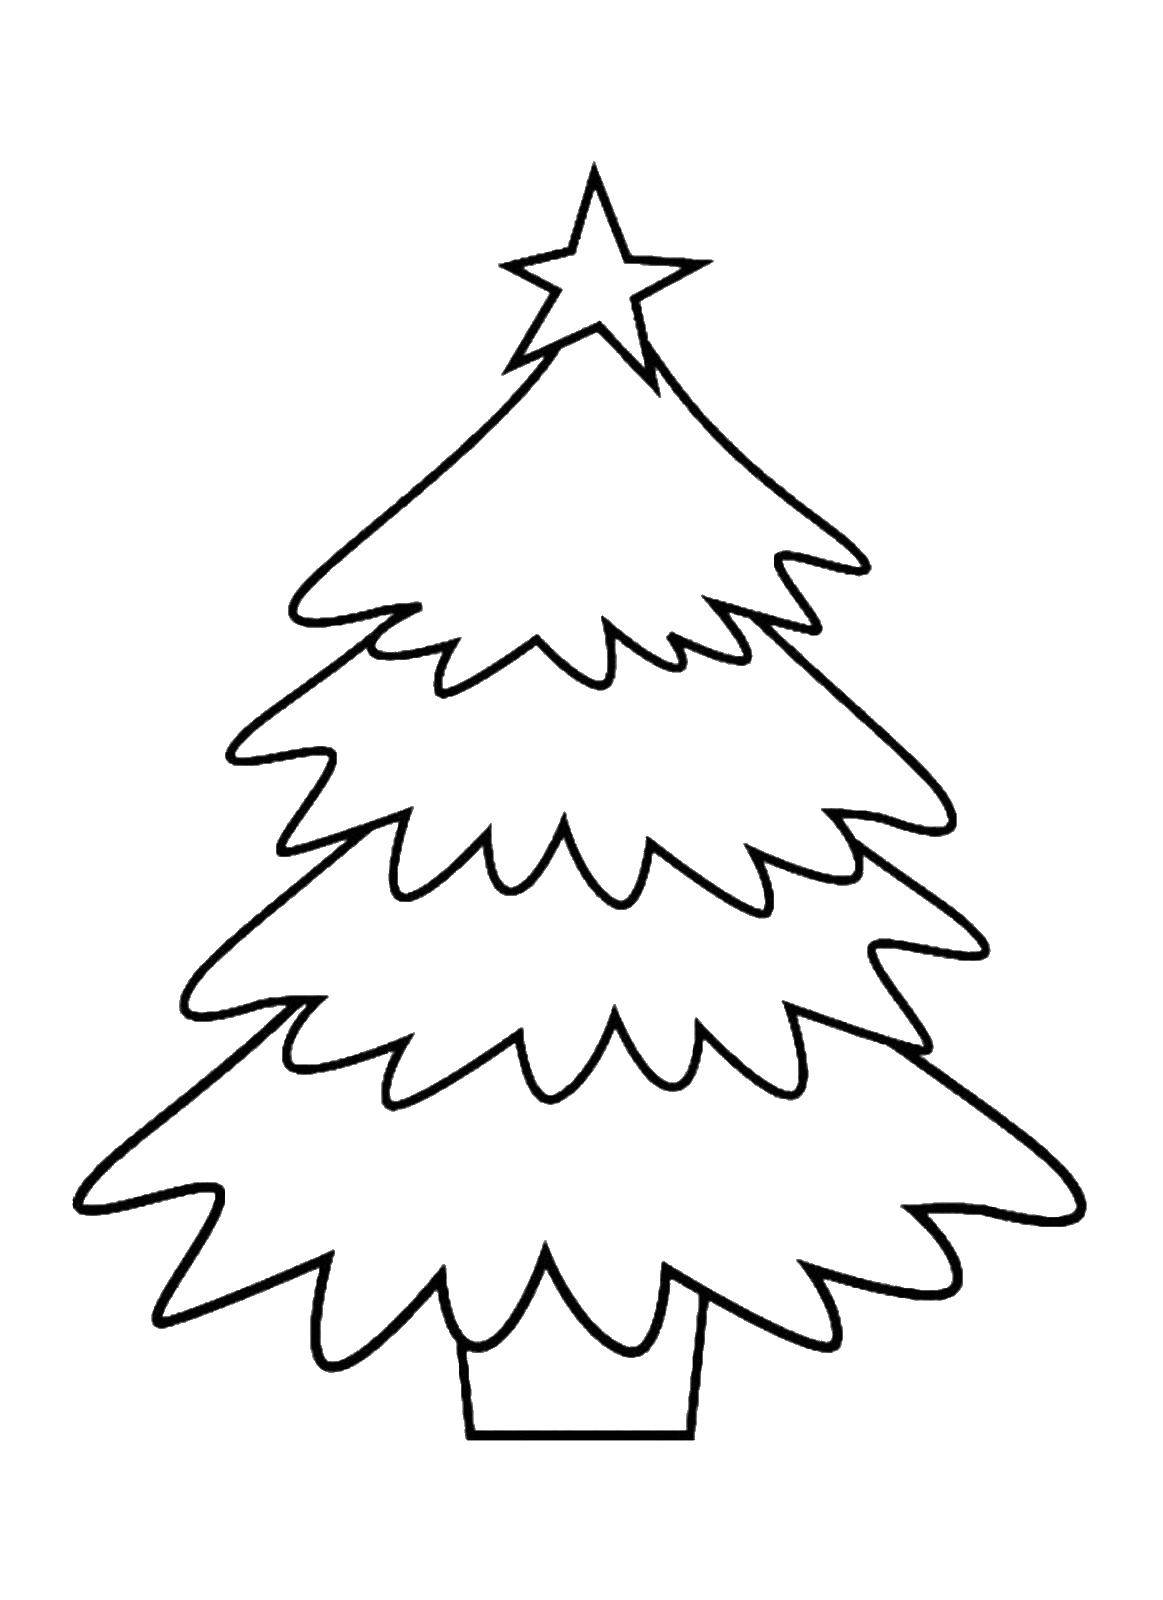 Coloring Tree with star. Category coloring Christmas tree. Tags:  tree.